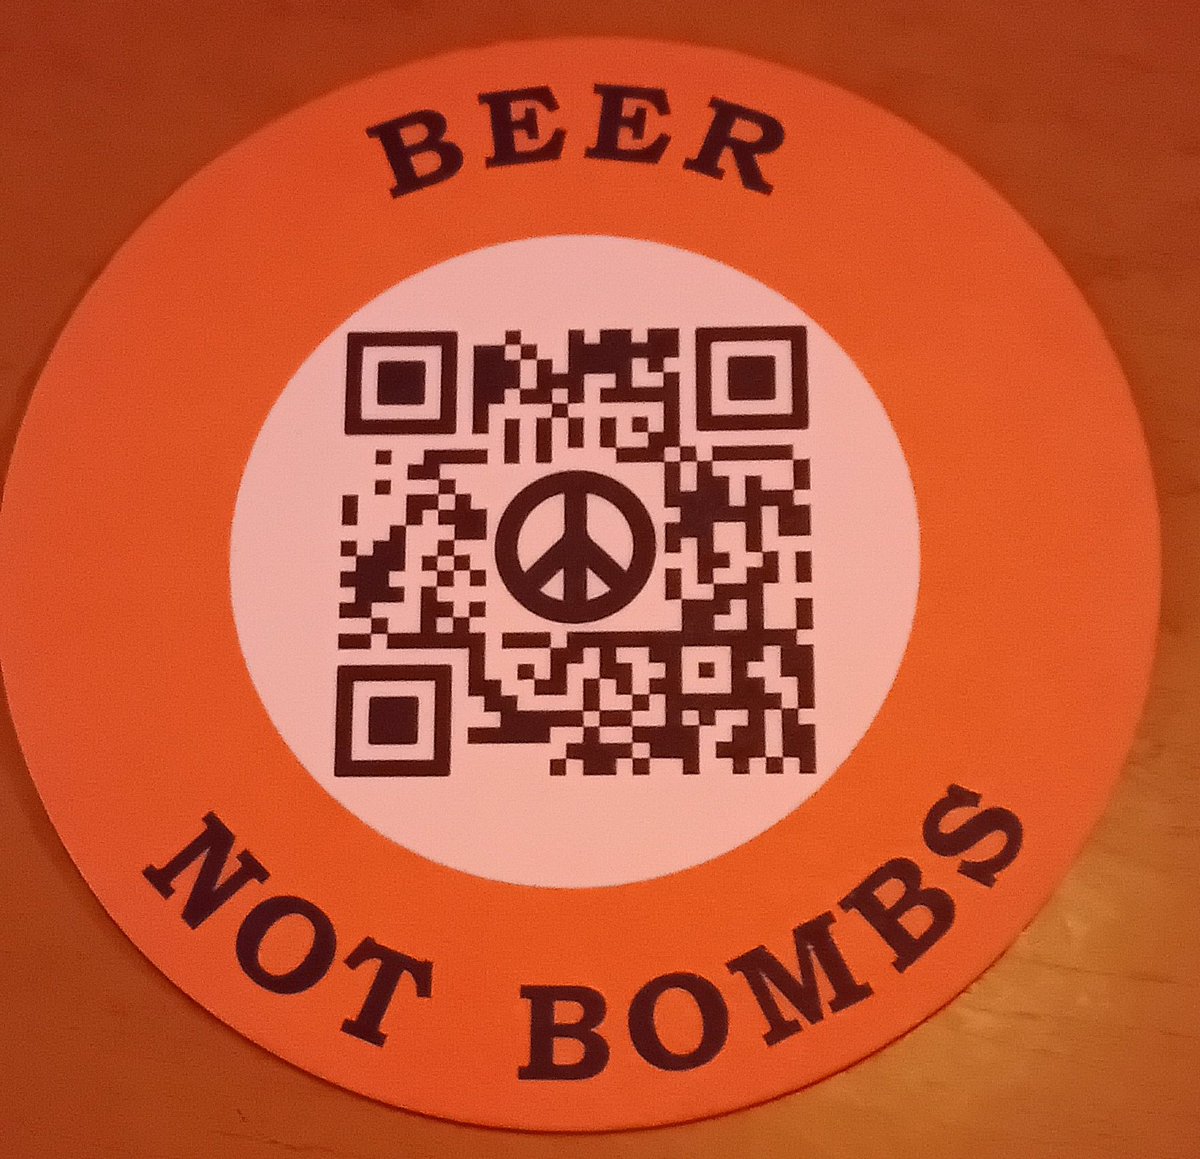 Beer Not Bombs at #PoemsNotBombs earlier, @stowtradeshall Walthamstow